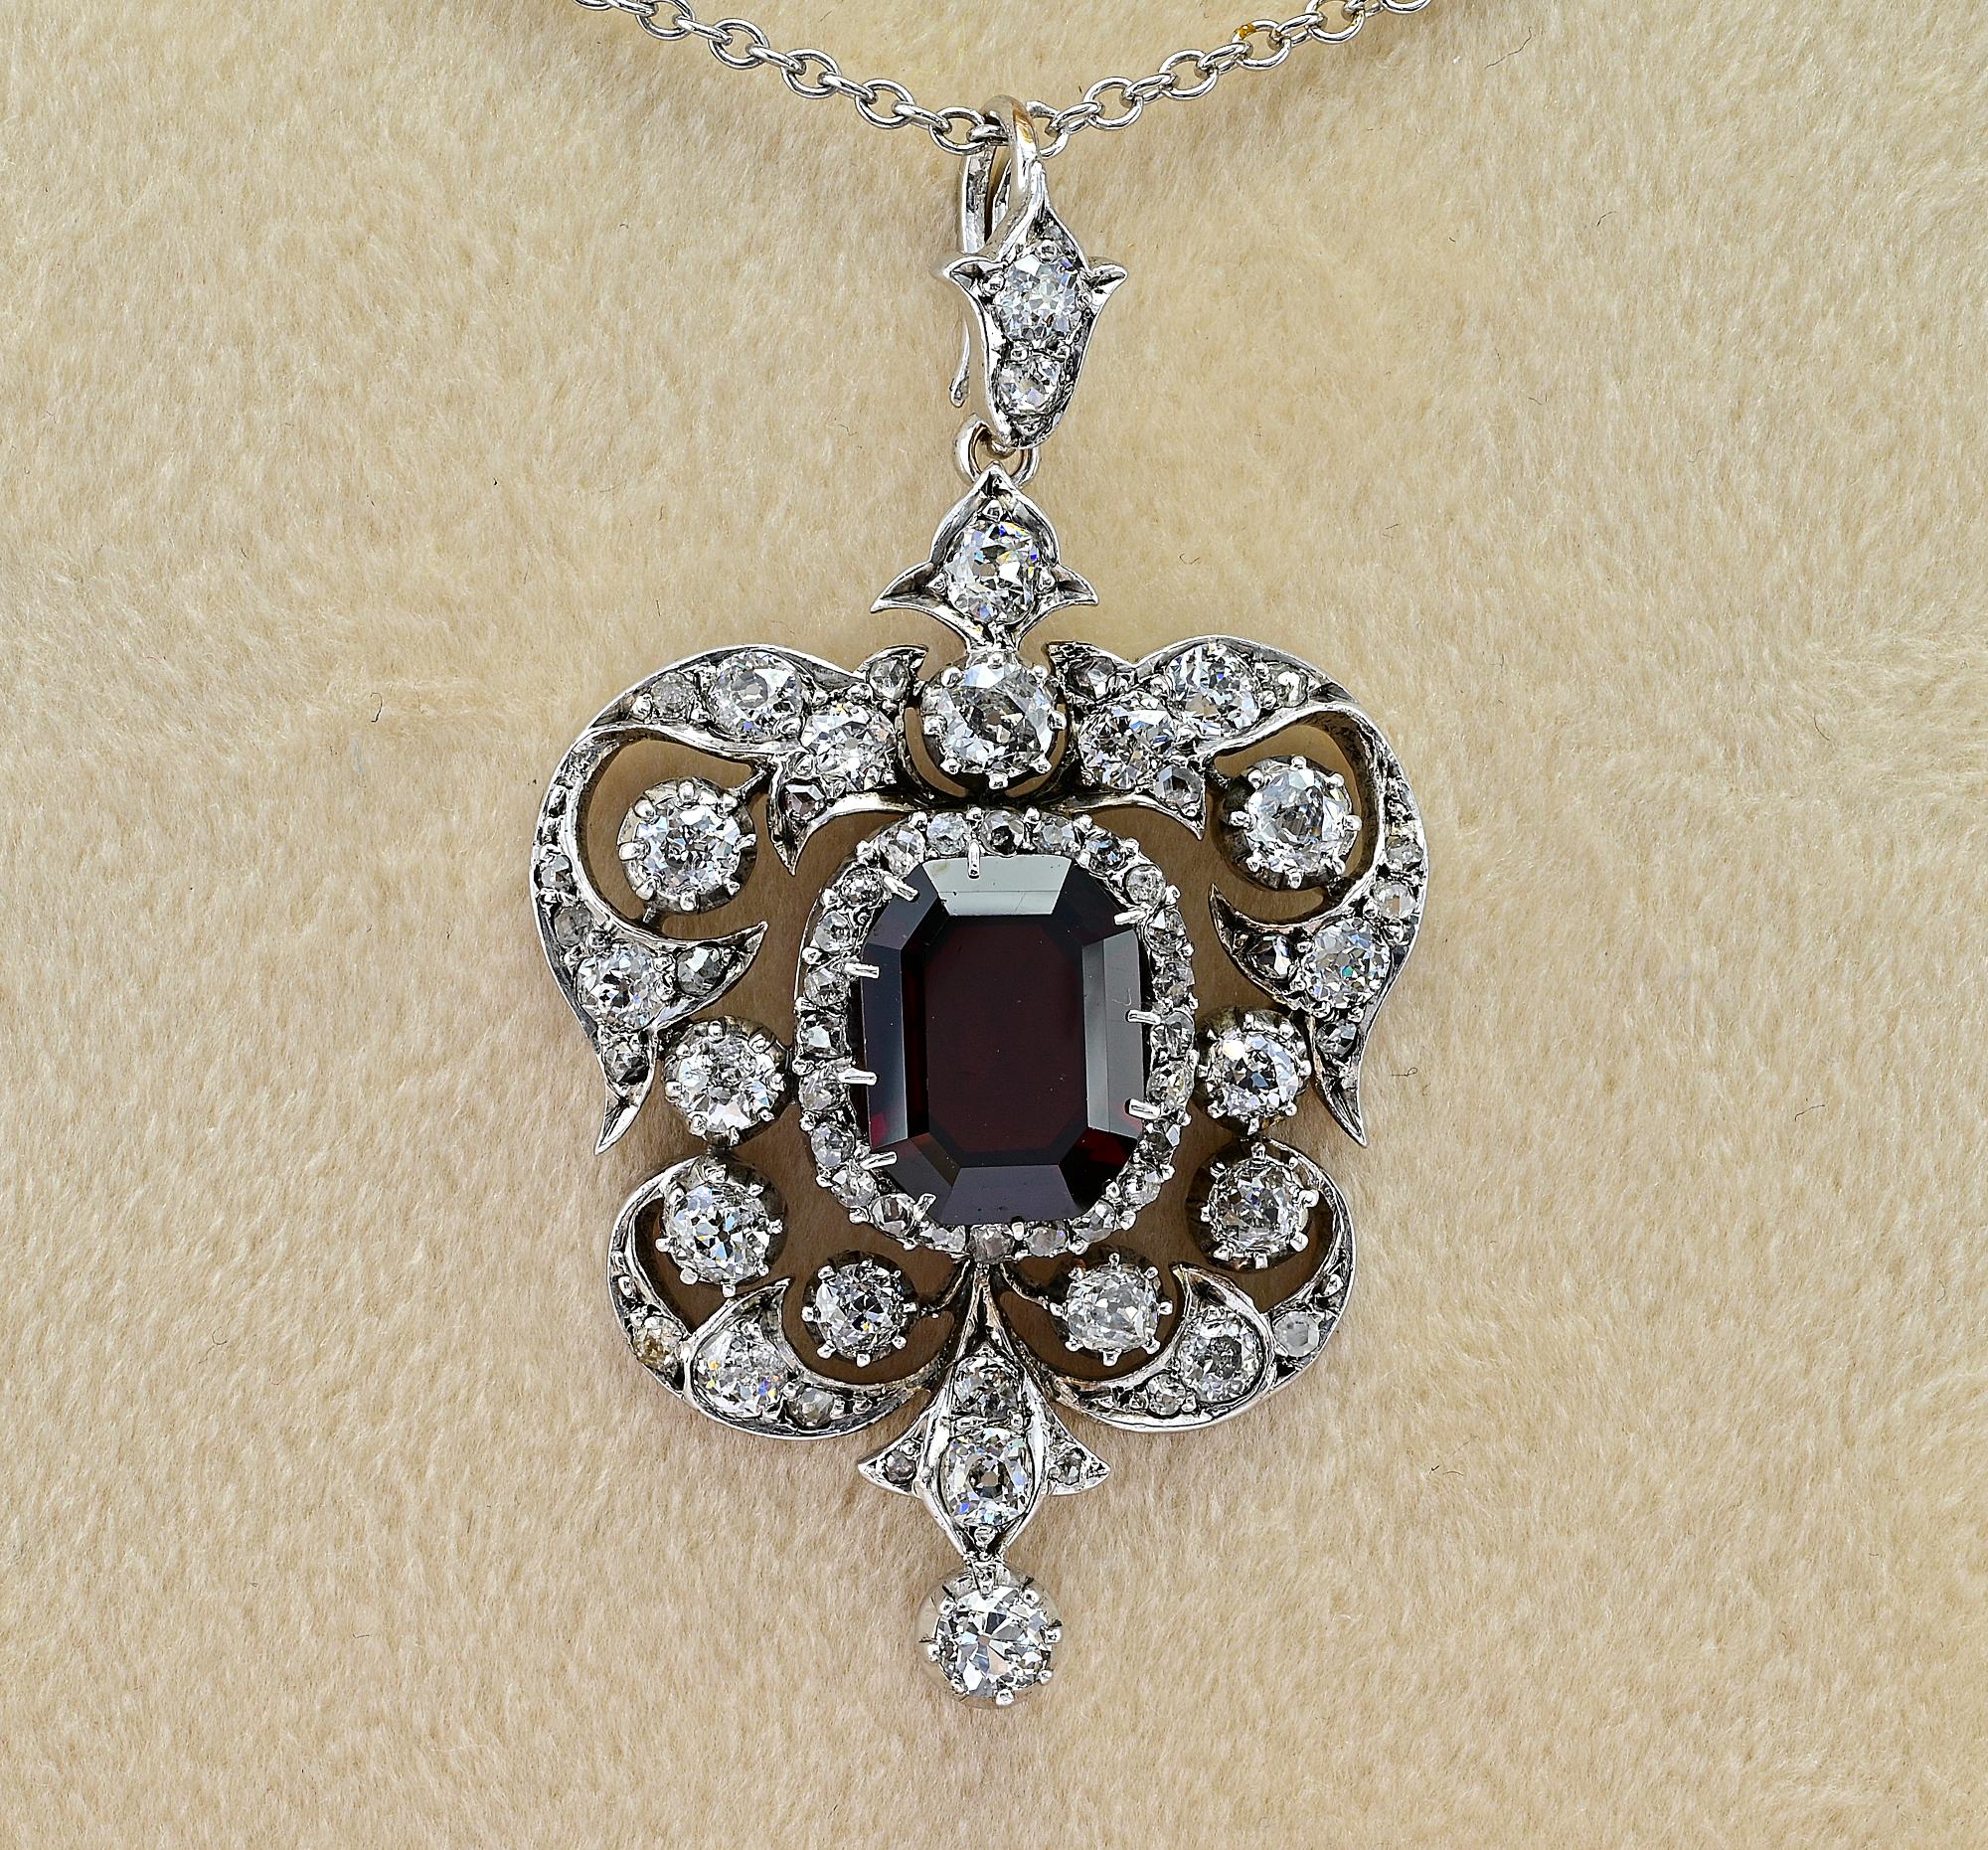 This captivating late Art Deco period pendant is 1925 circa
Skillfully hand crafted as unique of solid 18 Kt white gold
Ravishing openwork sparkling with abandon for an effective impact attracting for rare past workmanship and gem color in contrast